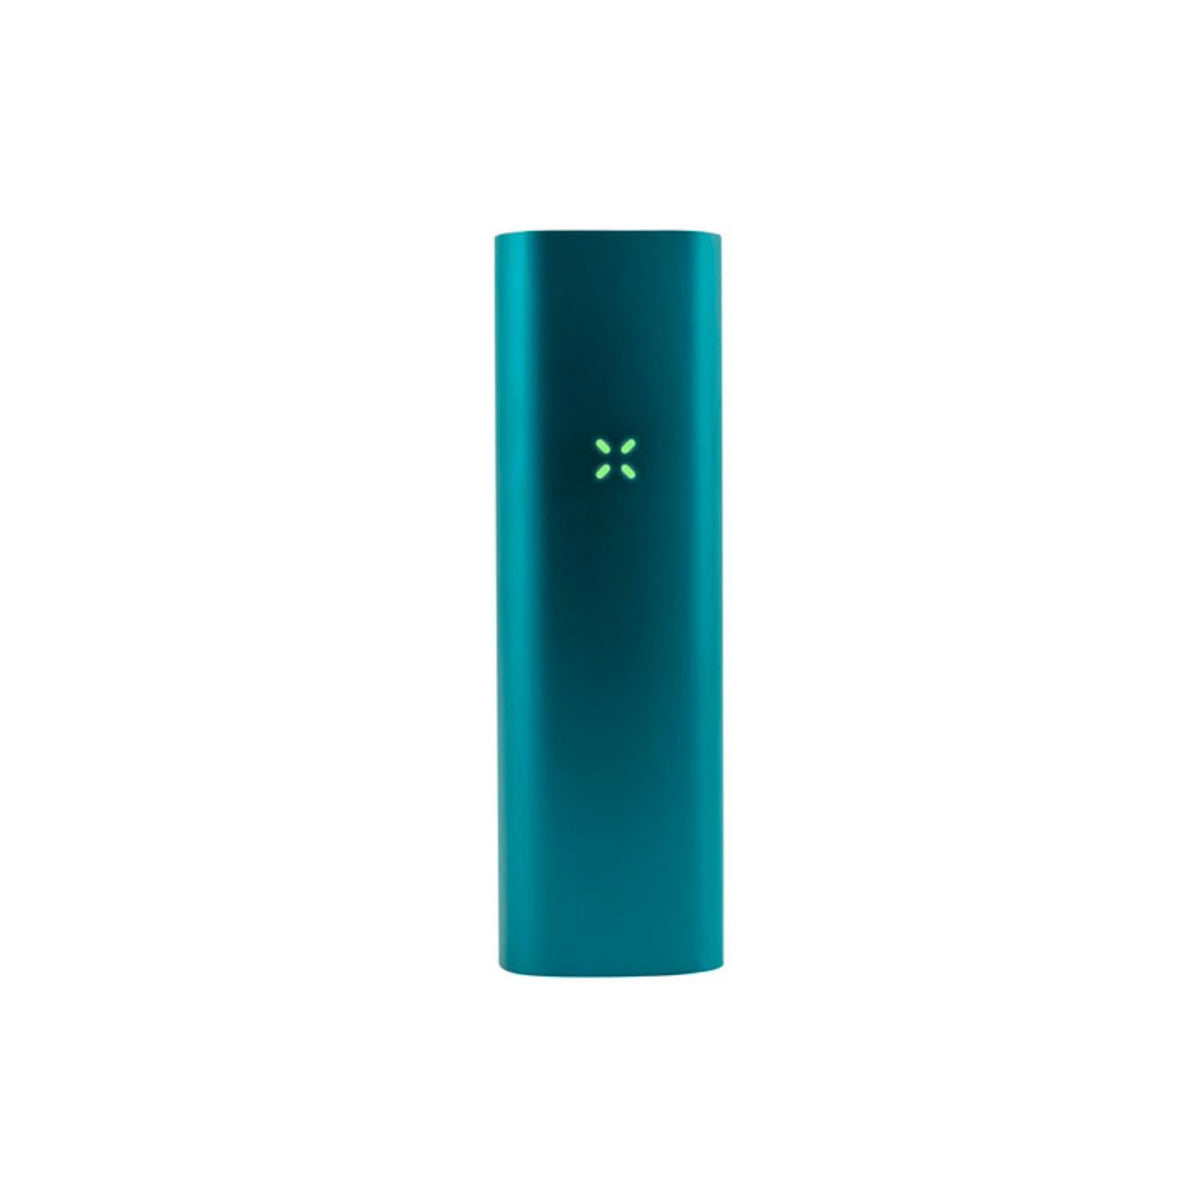 Pax 3 Special Edition - Complete Kit - Royal Queen Seeds